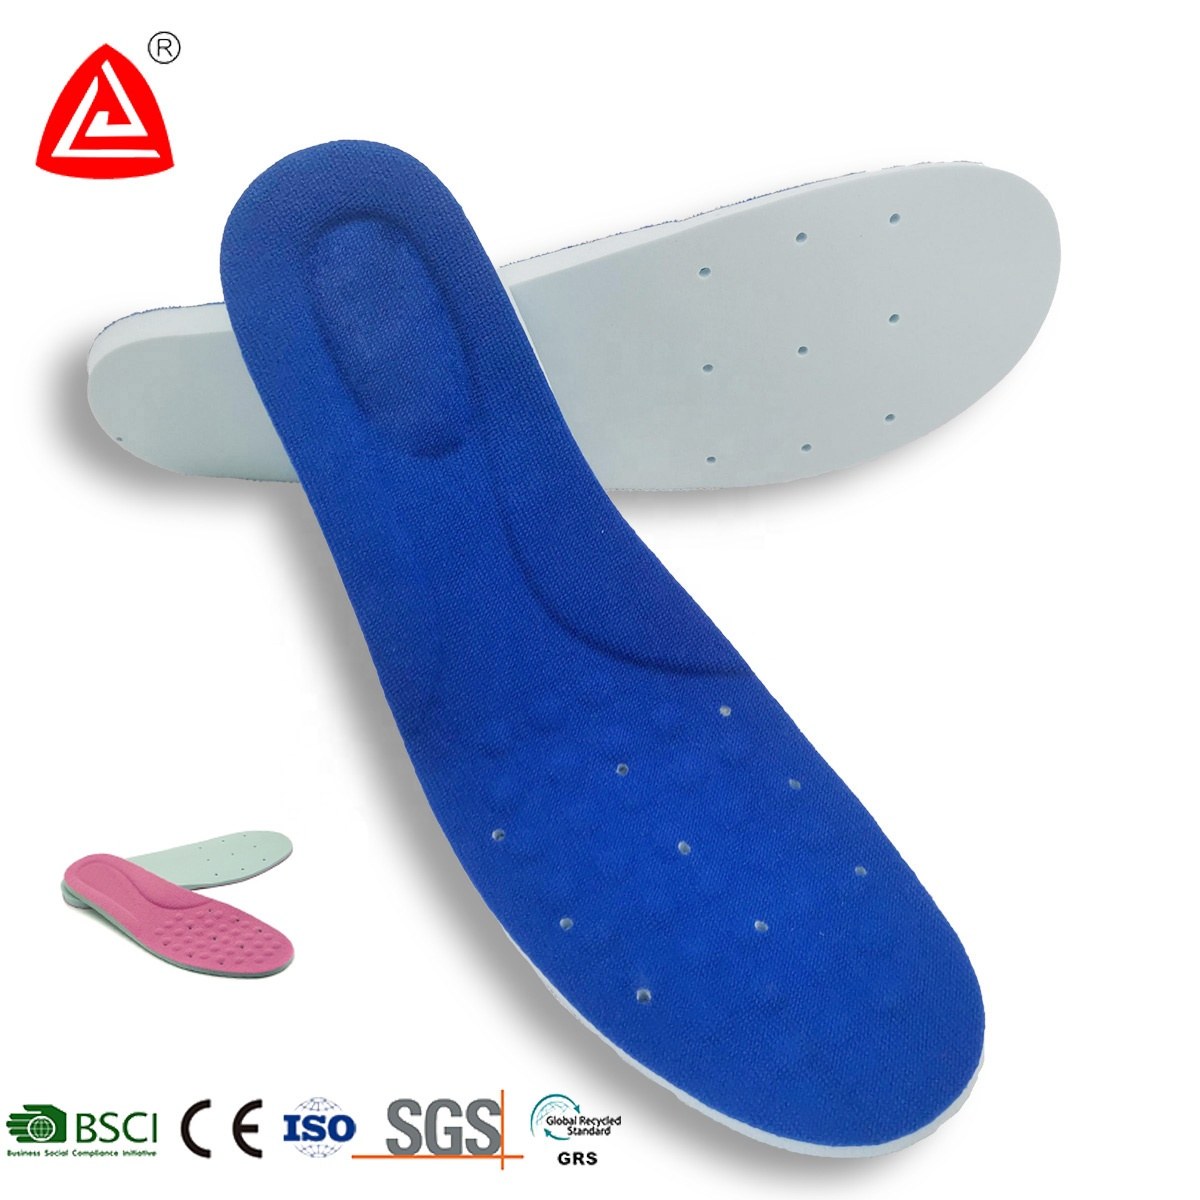 4 Signs You Should Get New Shoe Insoles